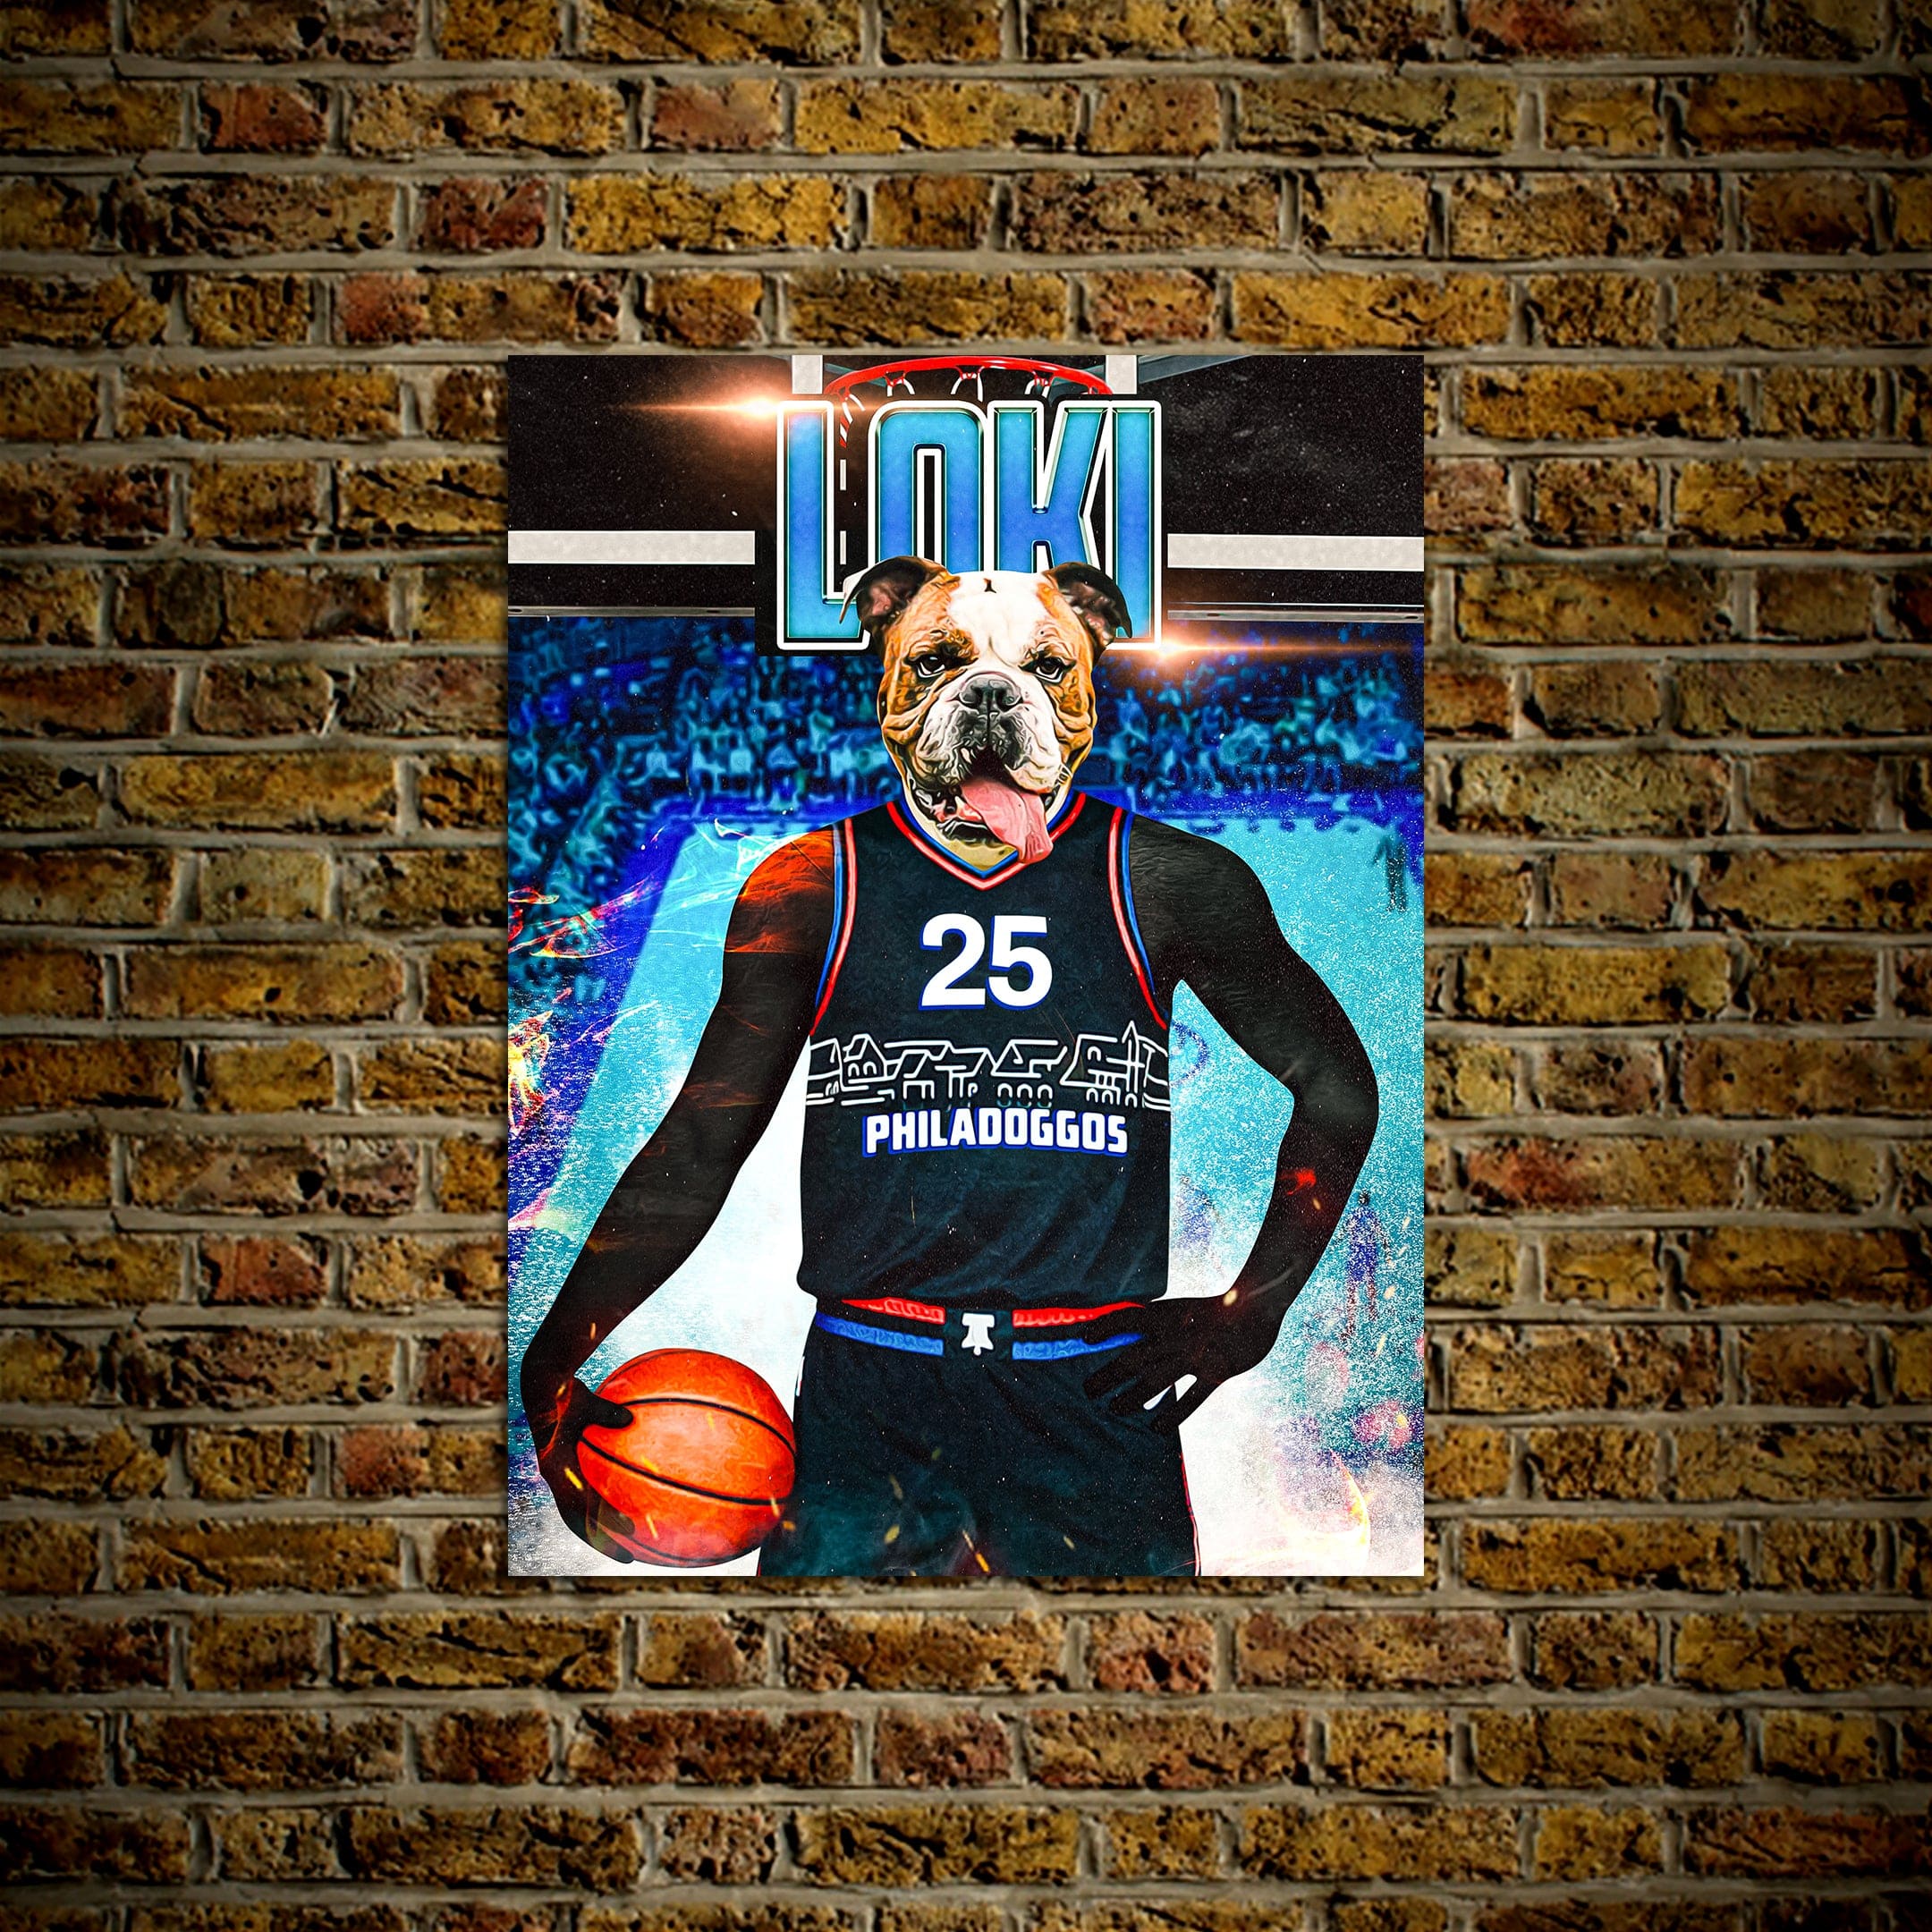 &#39;Philadoggos 76ers&#39; Personalized Pet Poster